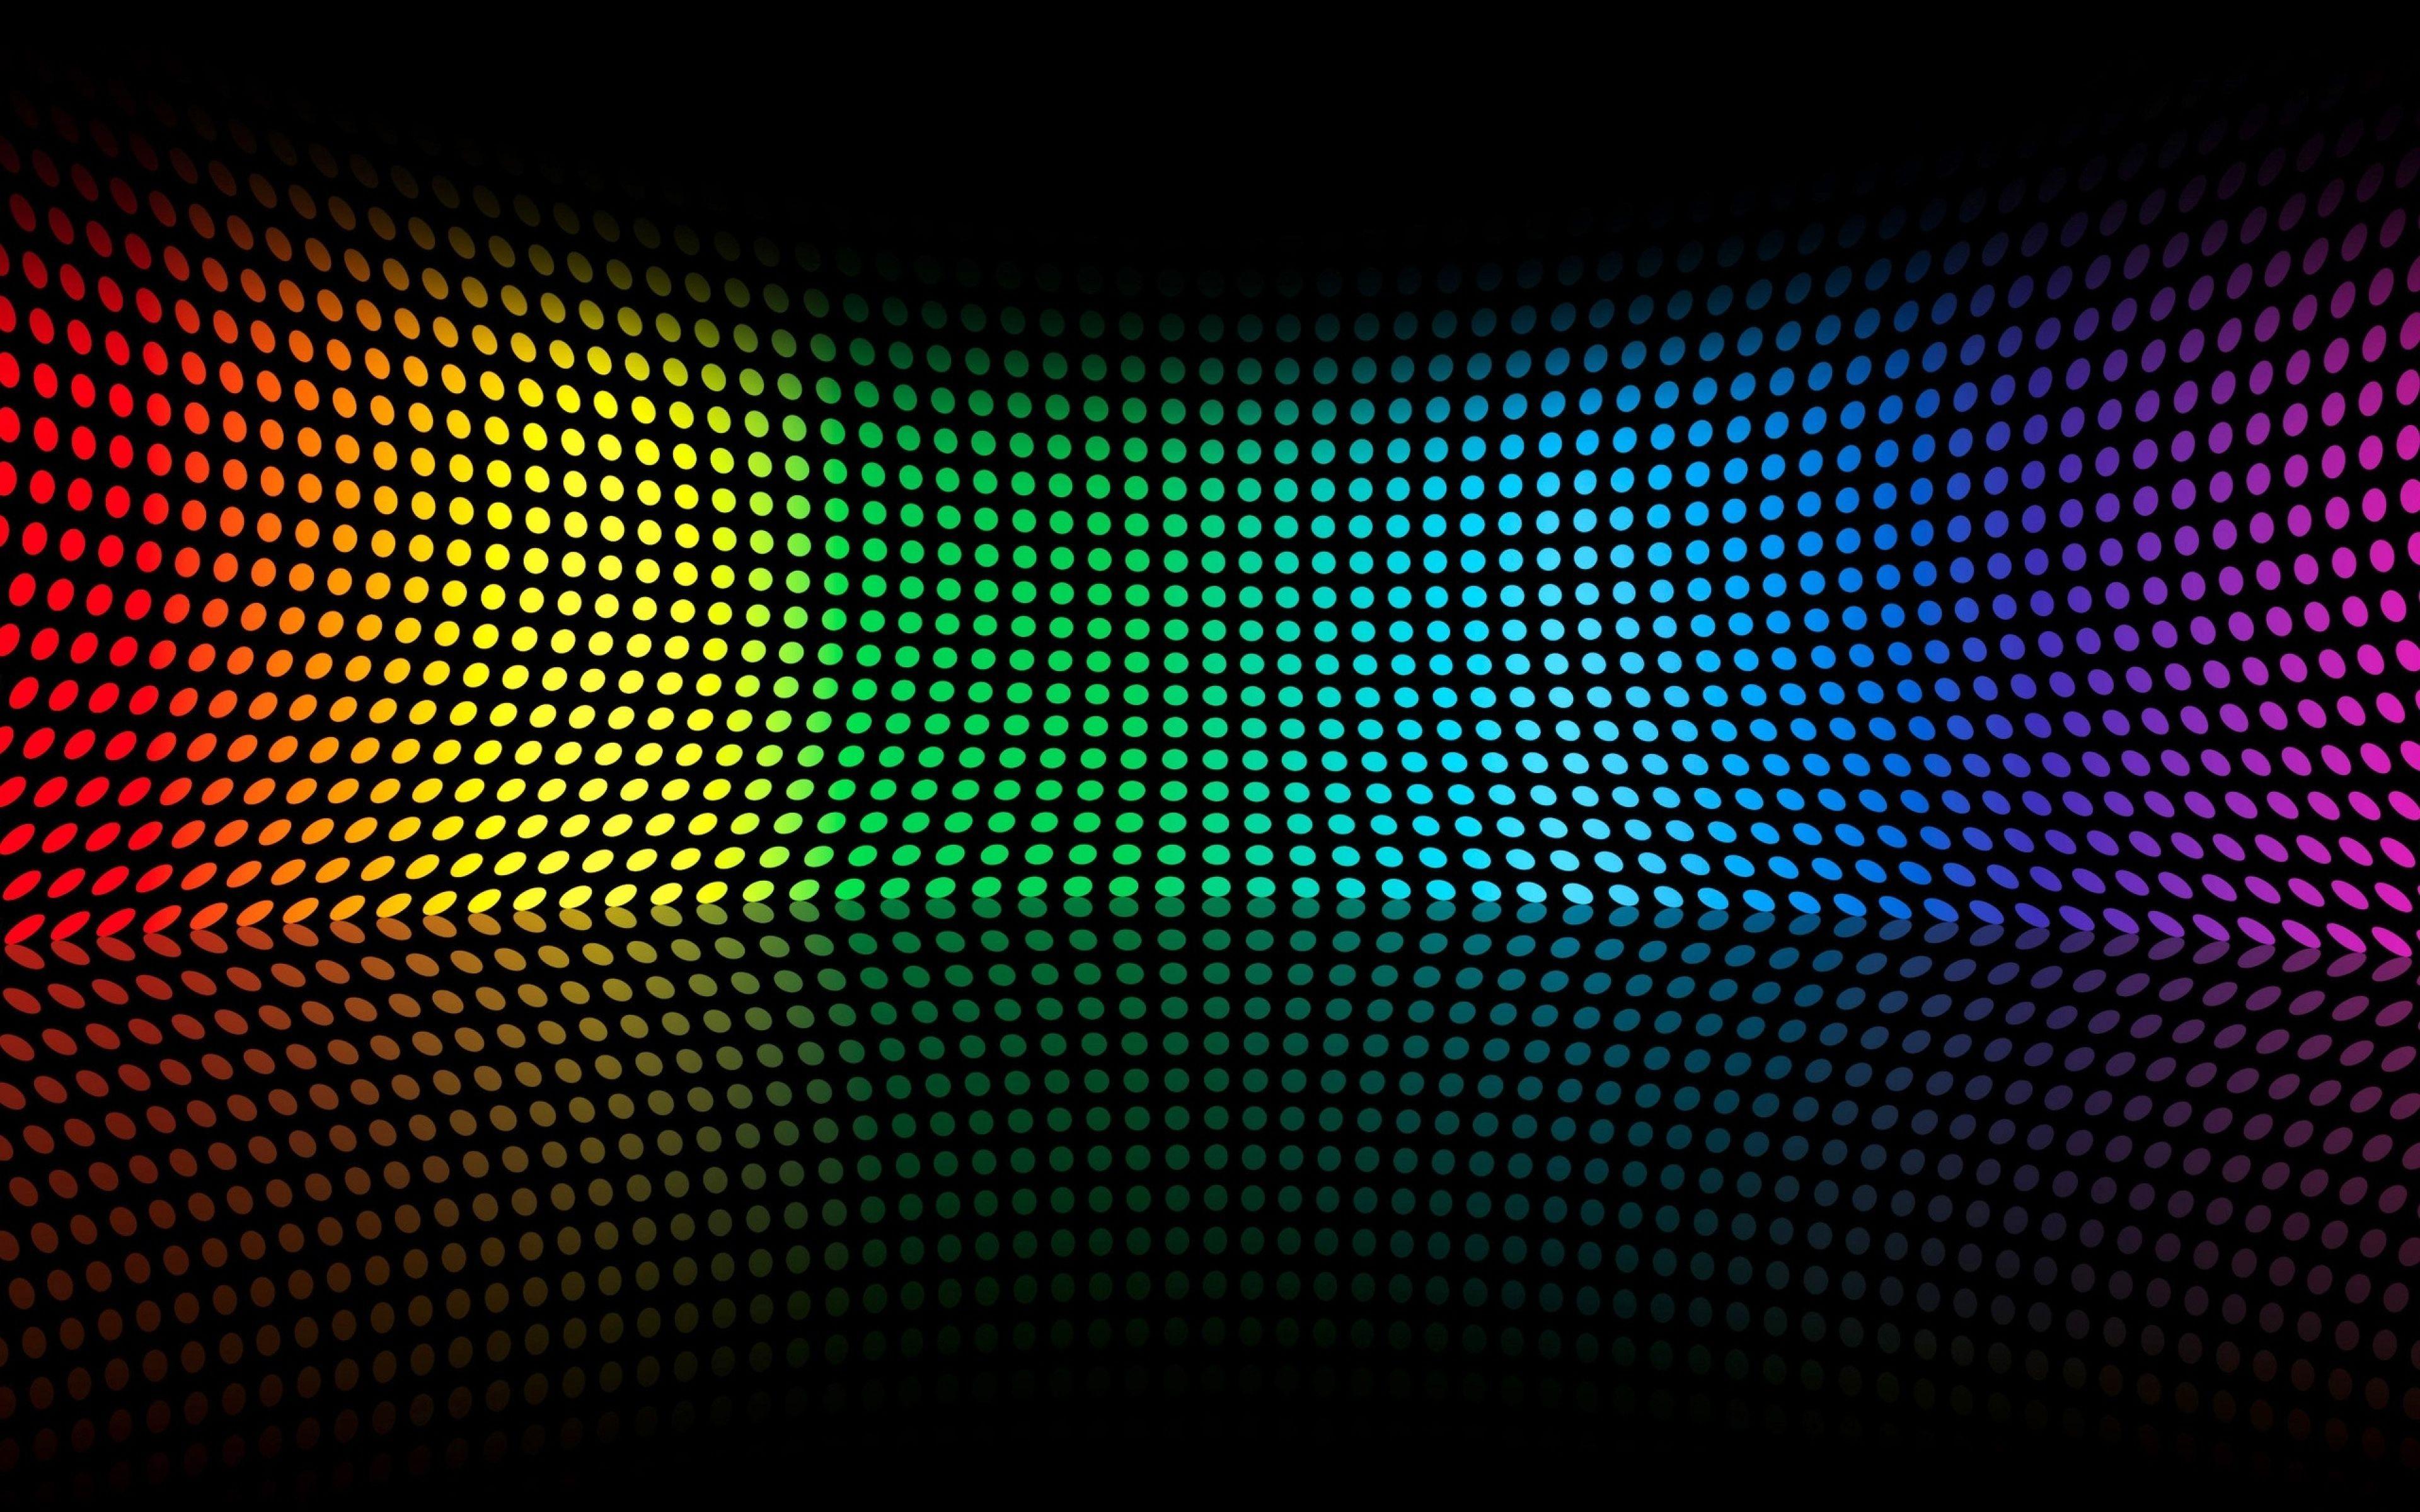 Wallpaper.wiki Colorful Curved Disco Light Image 3840x2400 PIC